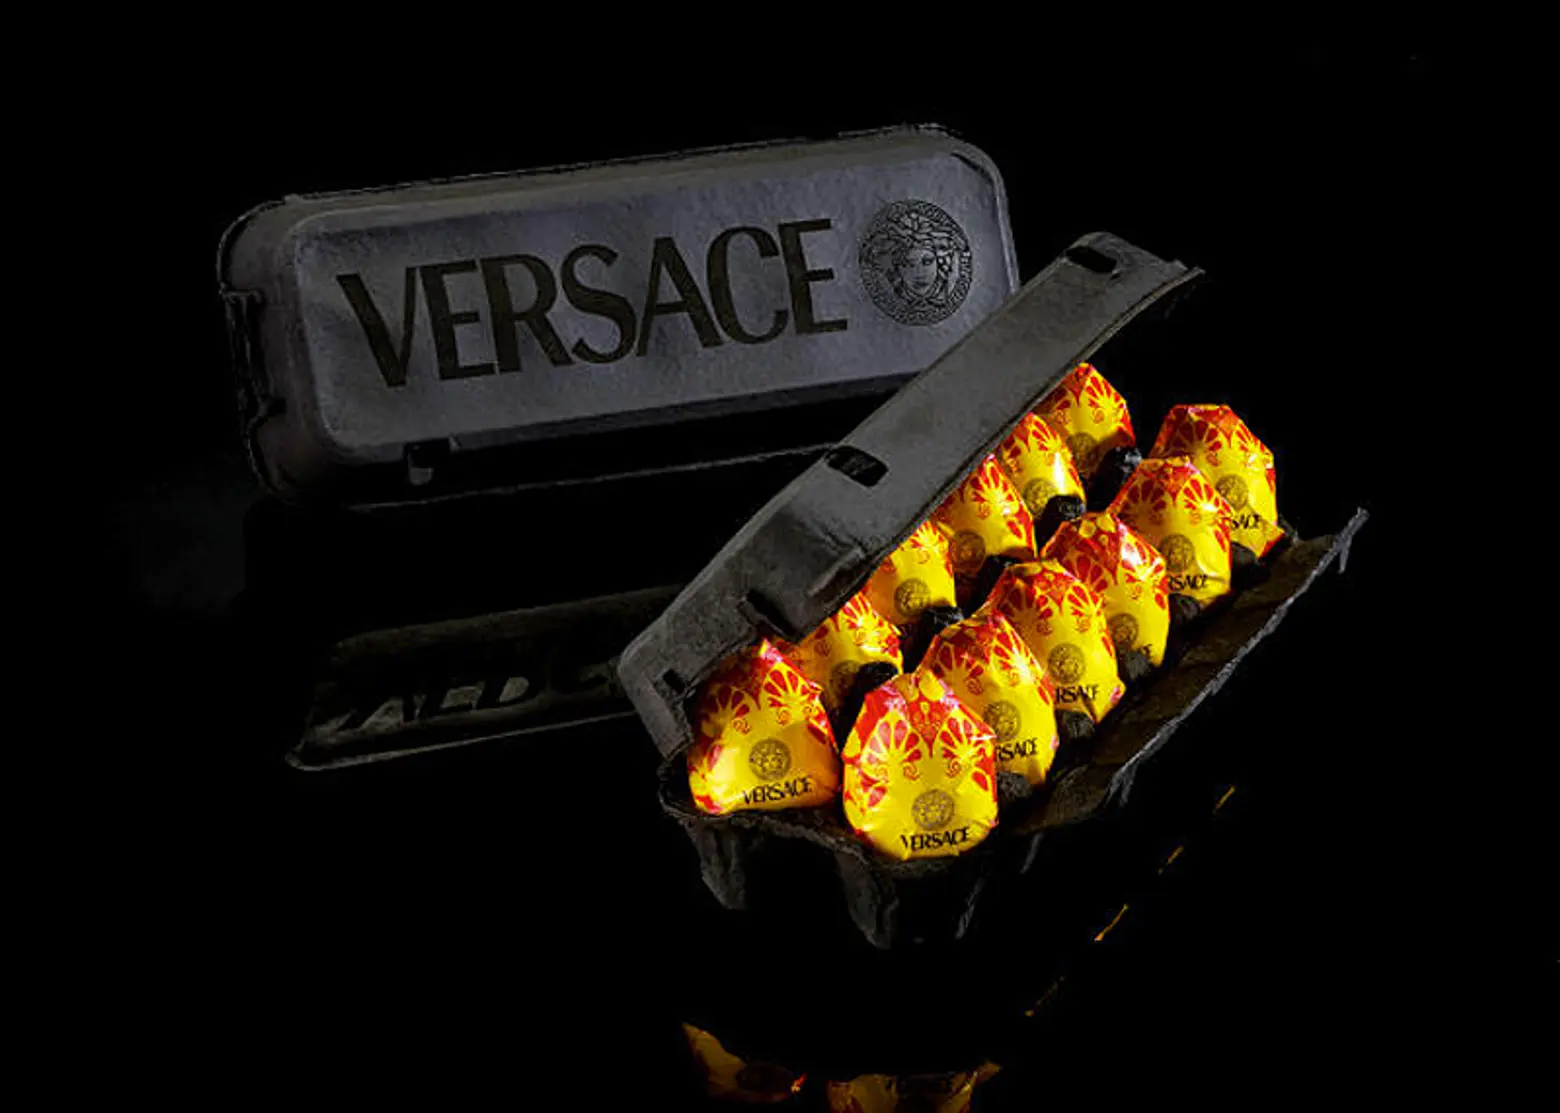 Everyday Foods Re-Branded as Luxury Products by Tiffany, Gucci and